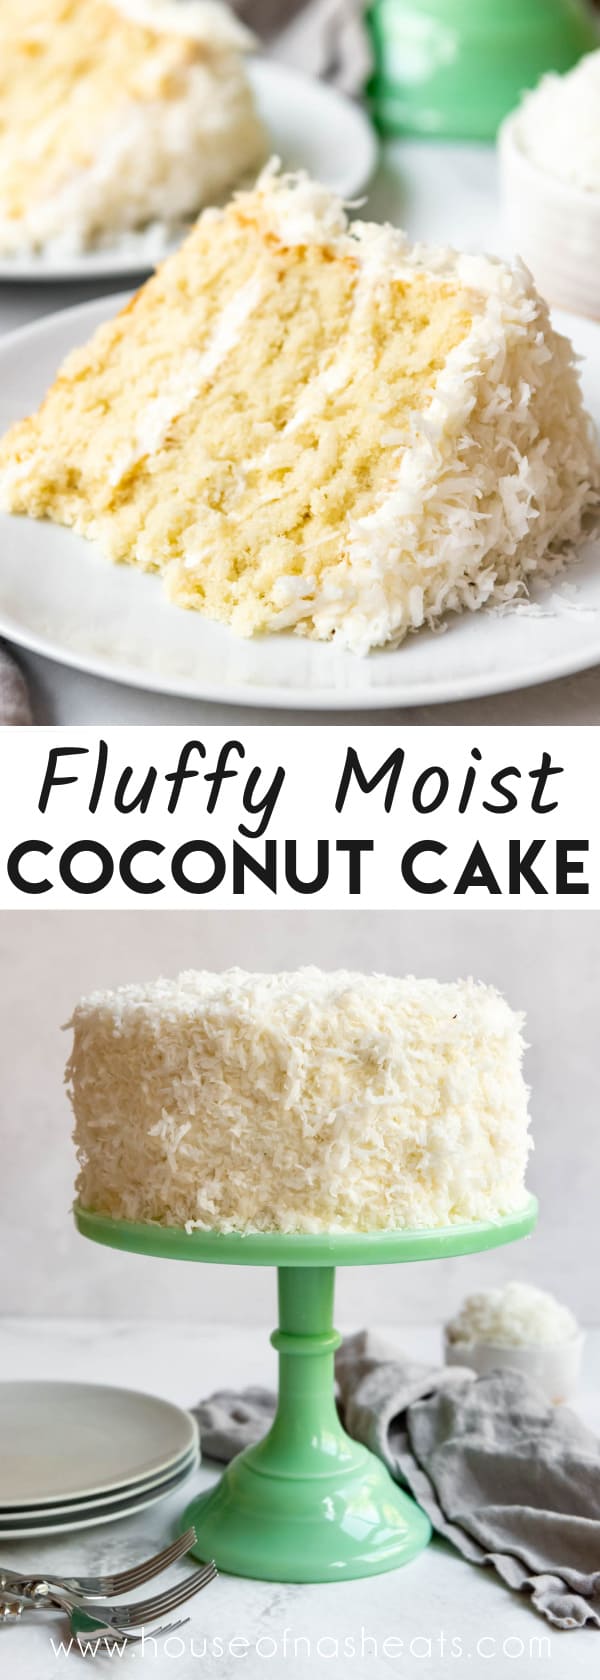 A collage of images of coconut cake with text overlay.